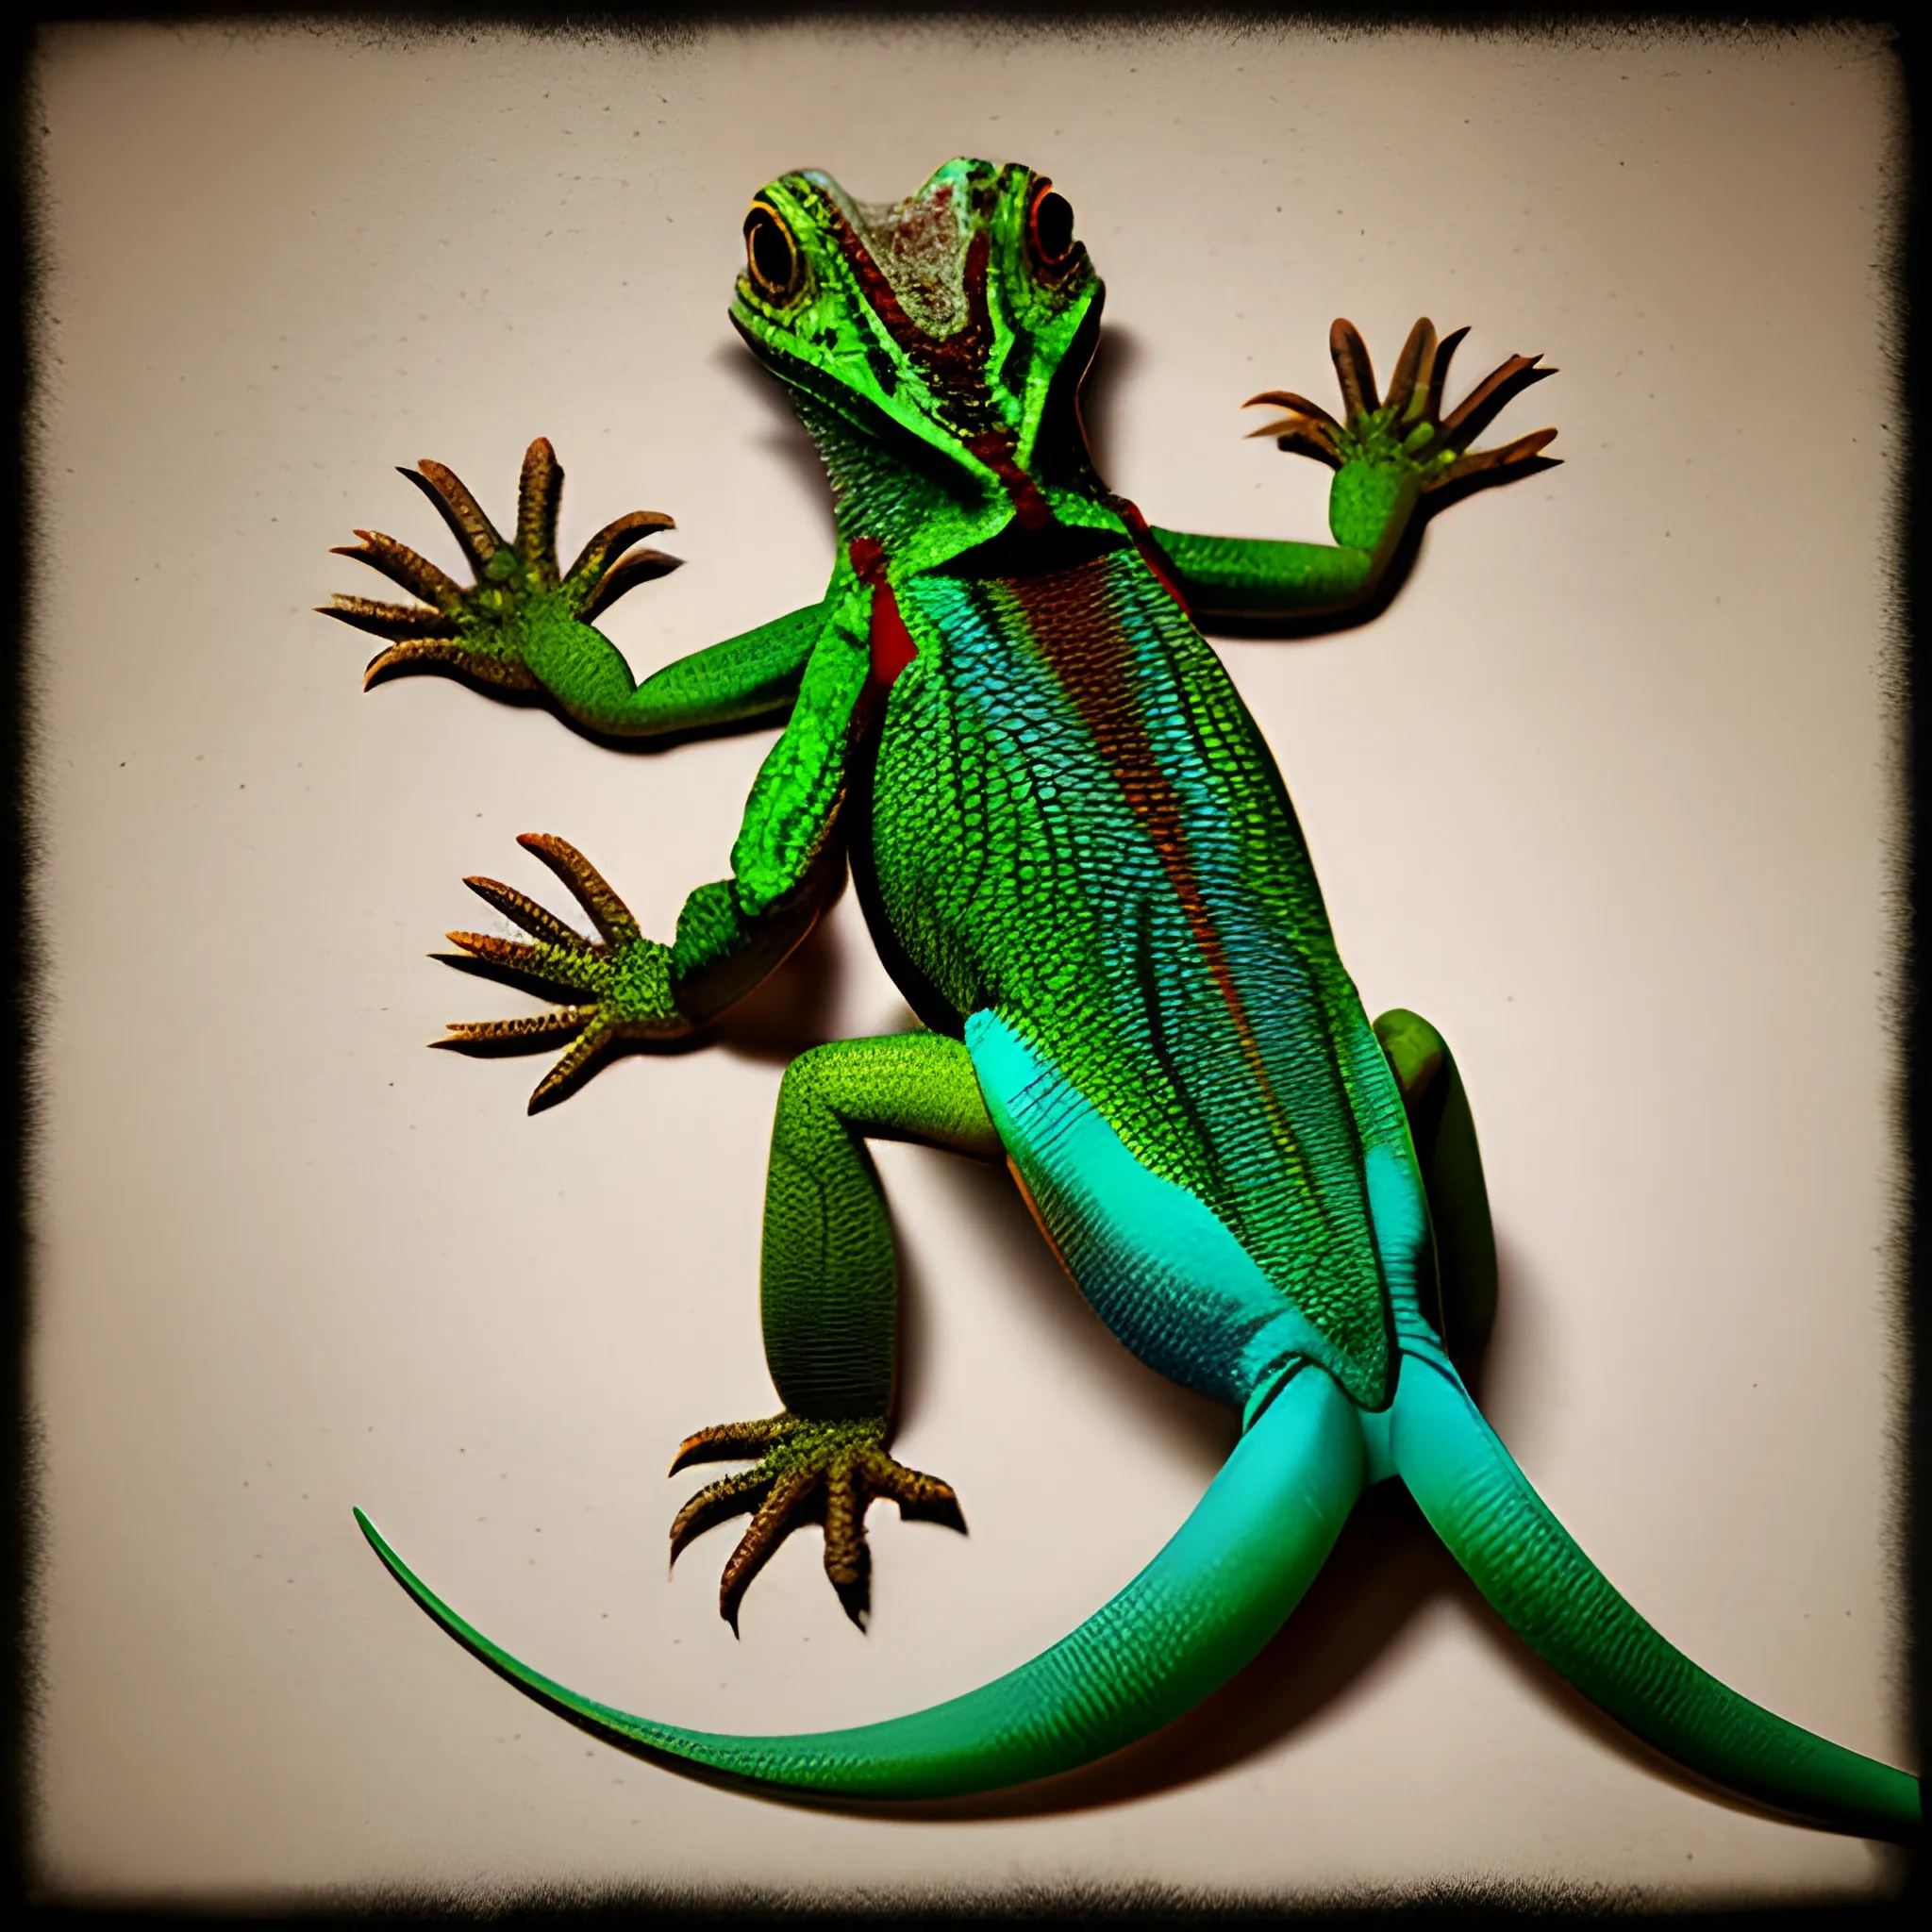 exploded lizard, photography